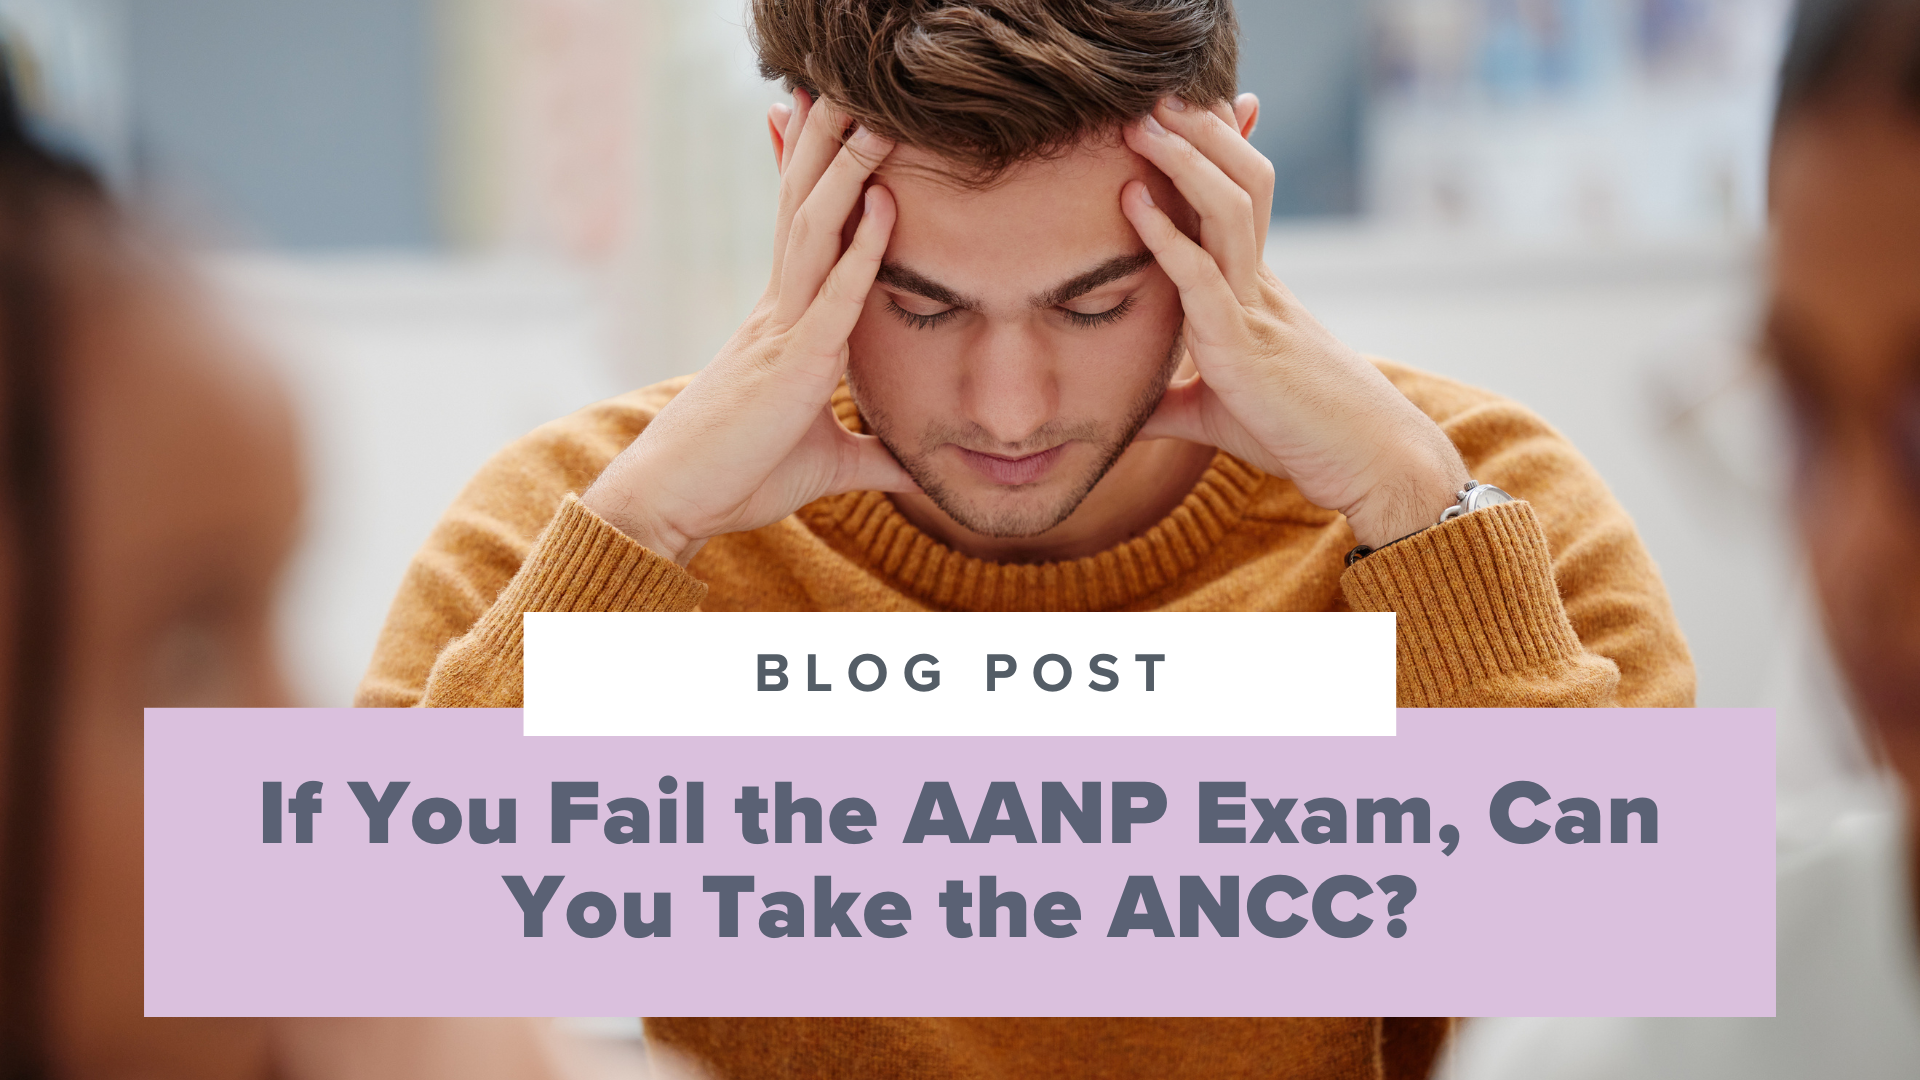 SMNP Blog - If You Fail the AANP Exam, Can You Take the ANCC?